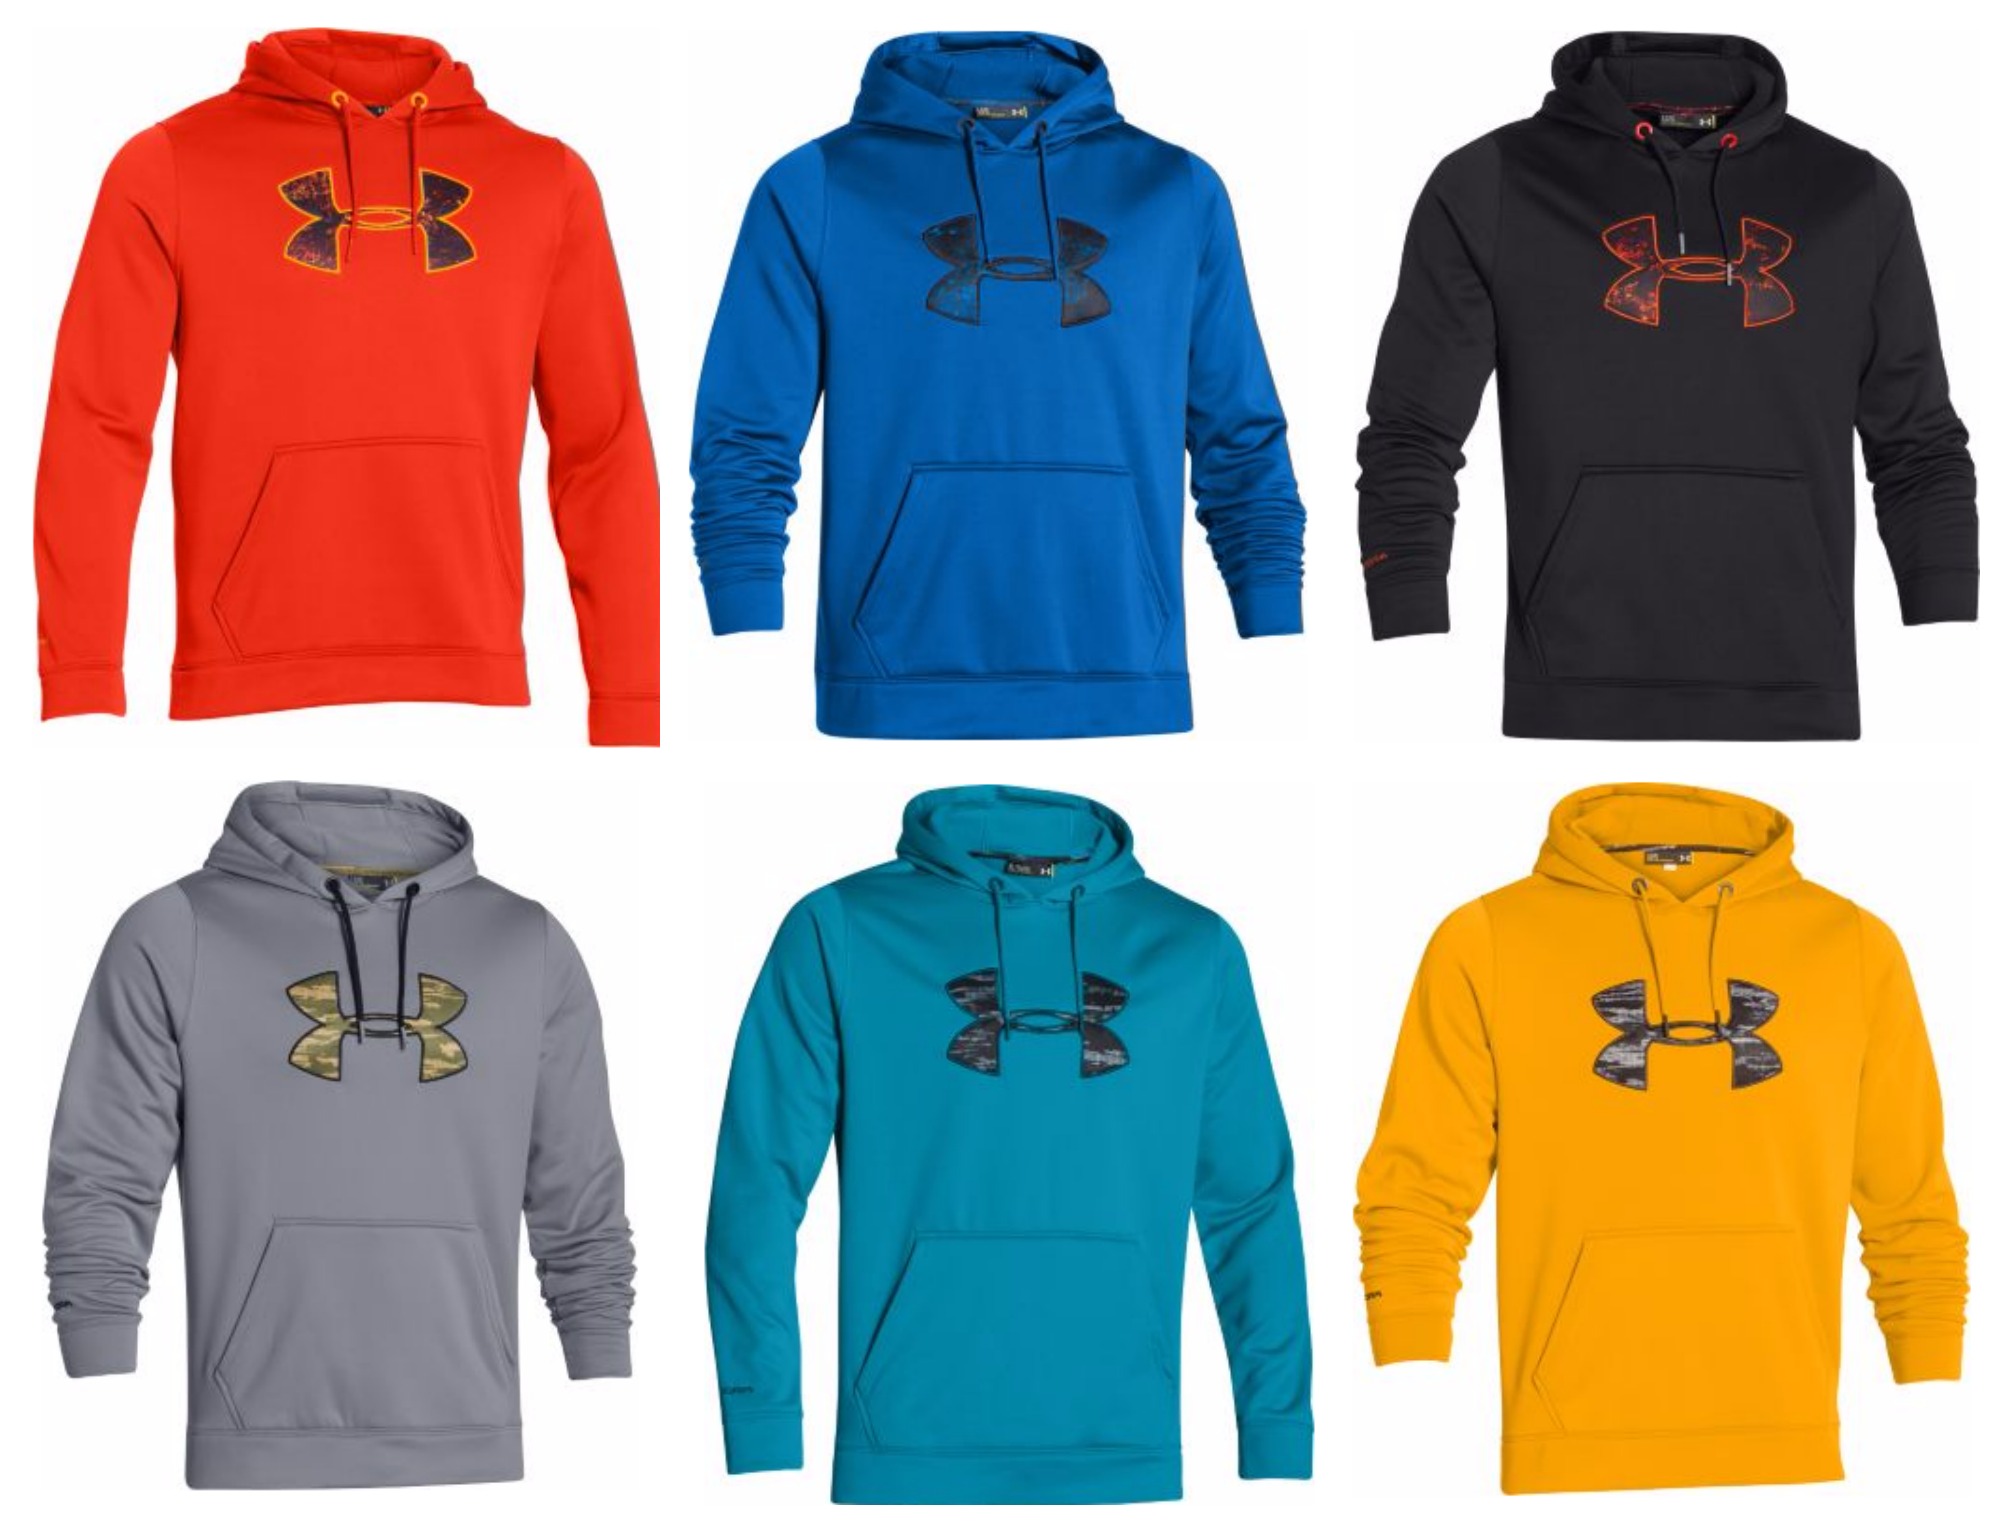 Cabela's: Under Armour Men's Rival Hoodie ONLY $17.99 (Regularly $54.99)